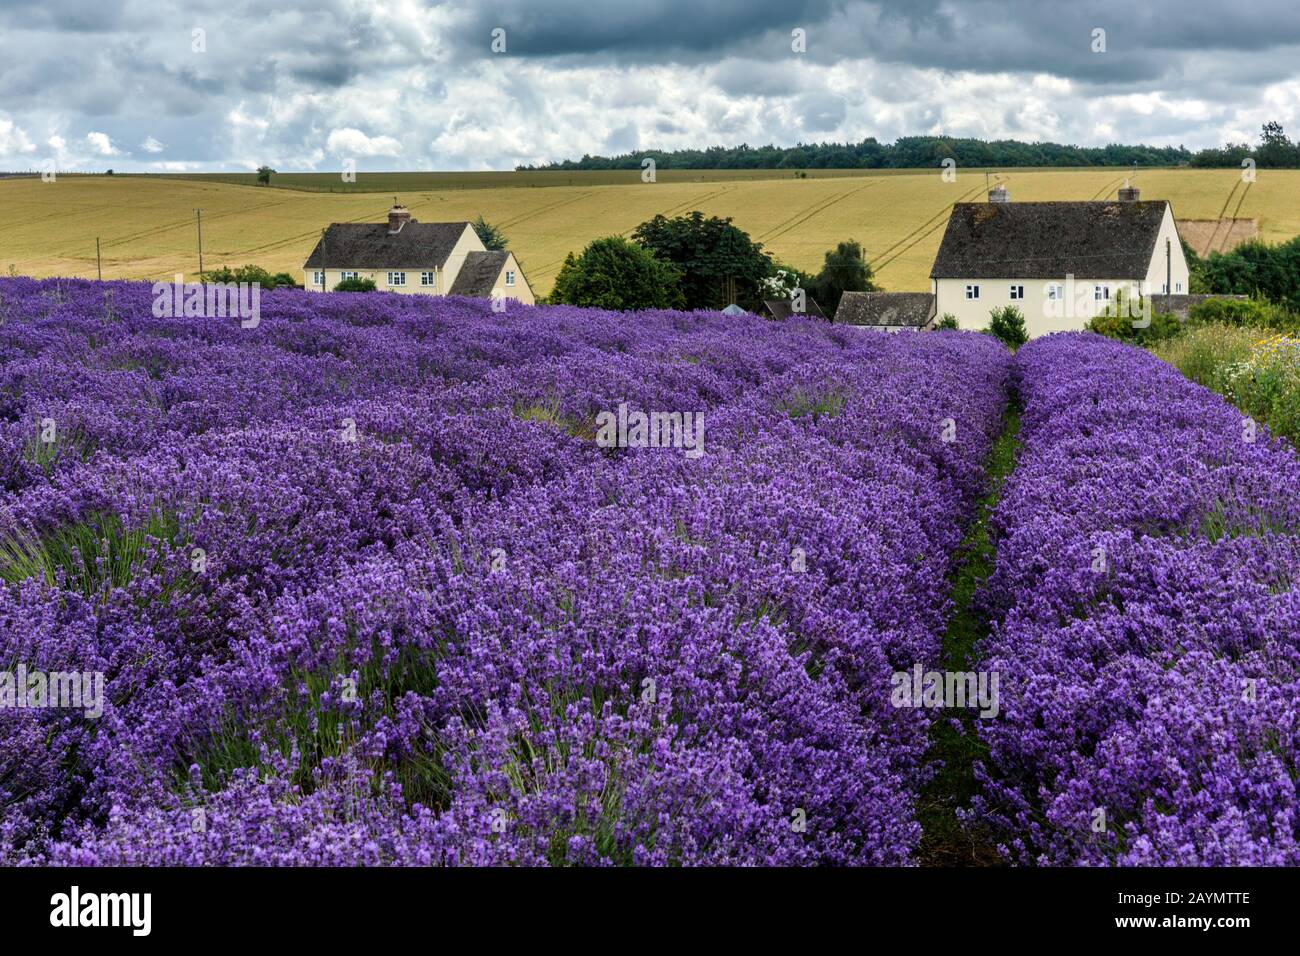 Rows of lavender in lavender fields at Snowshill Lavender Farm, Snowshill, The Cotswolds,  England UK Stock Photo